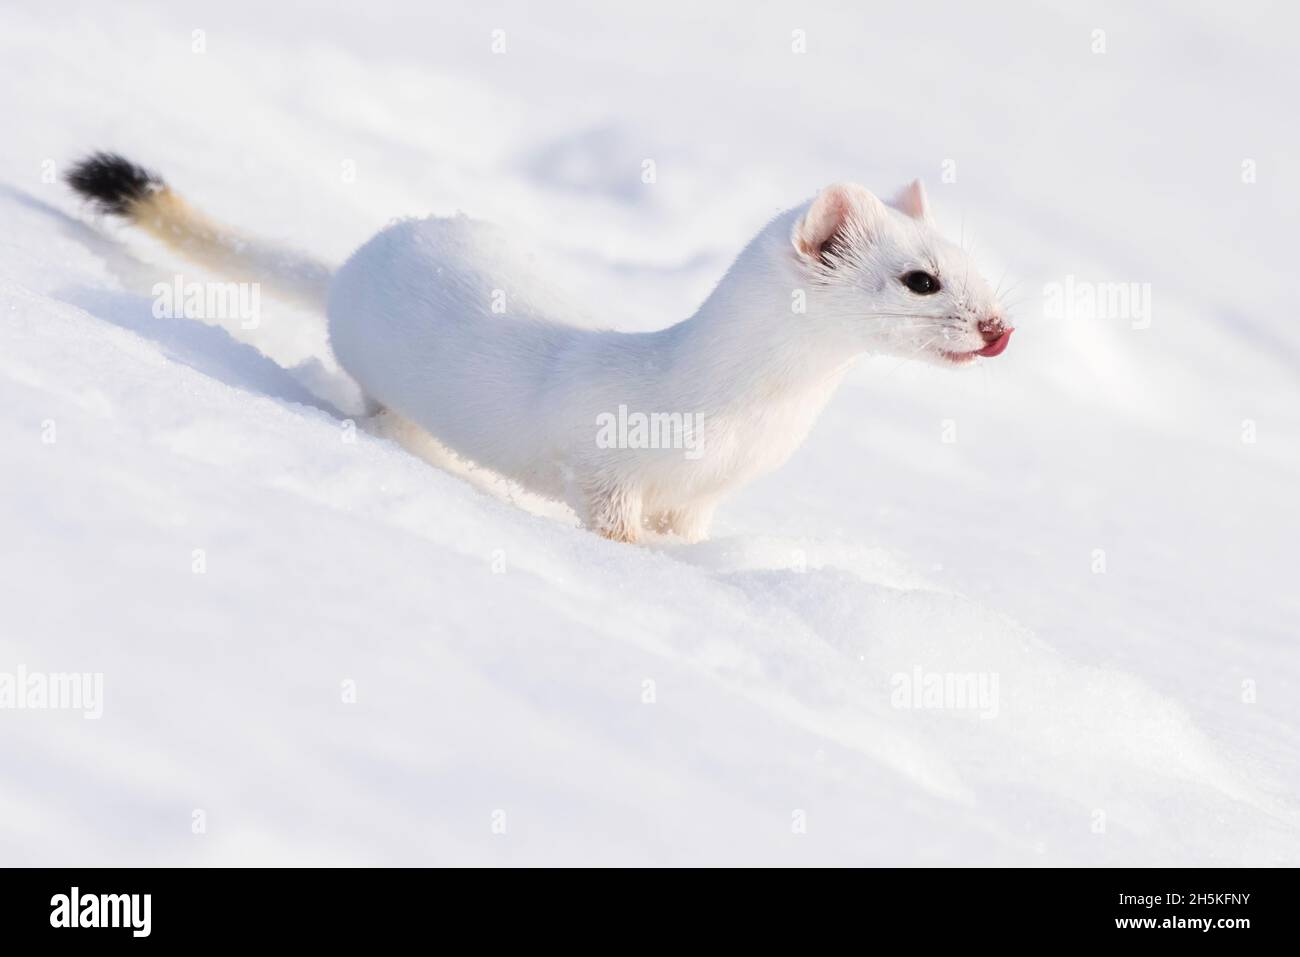 A short-tailed weasel (Mustela erminea) camouflaged in its white winter coat, looking out over the snow covered landscape Stock Photo